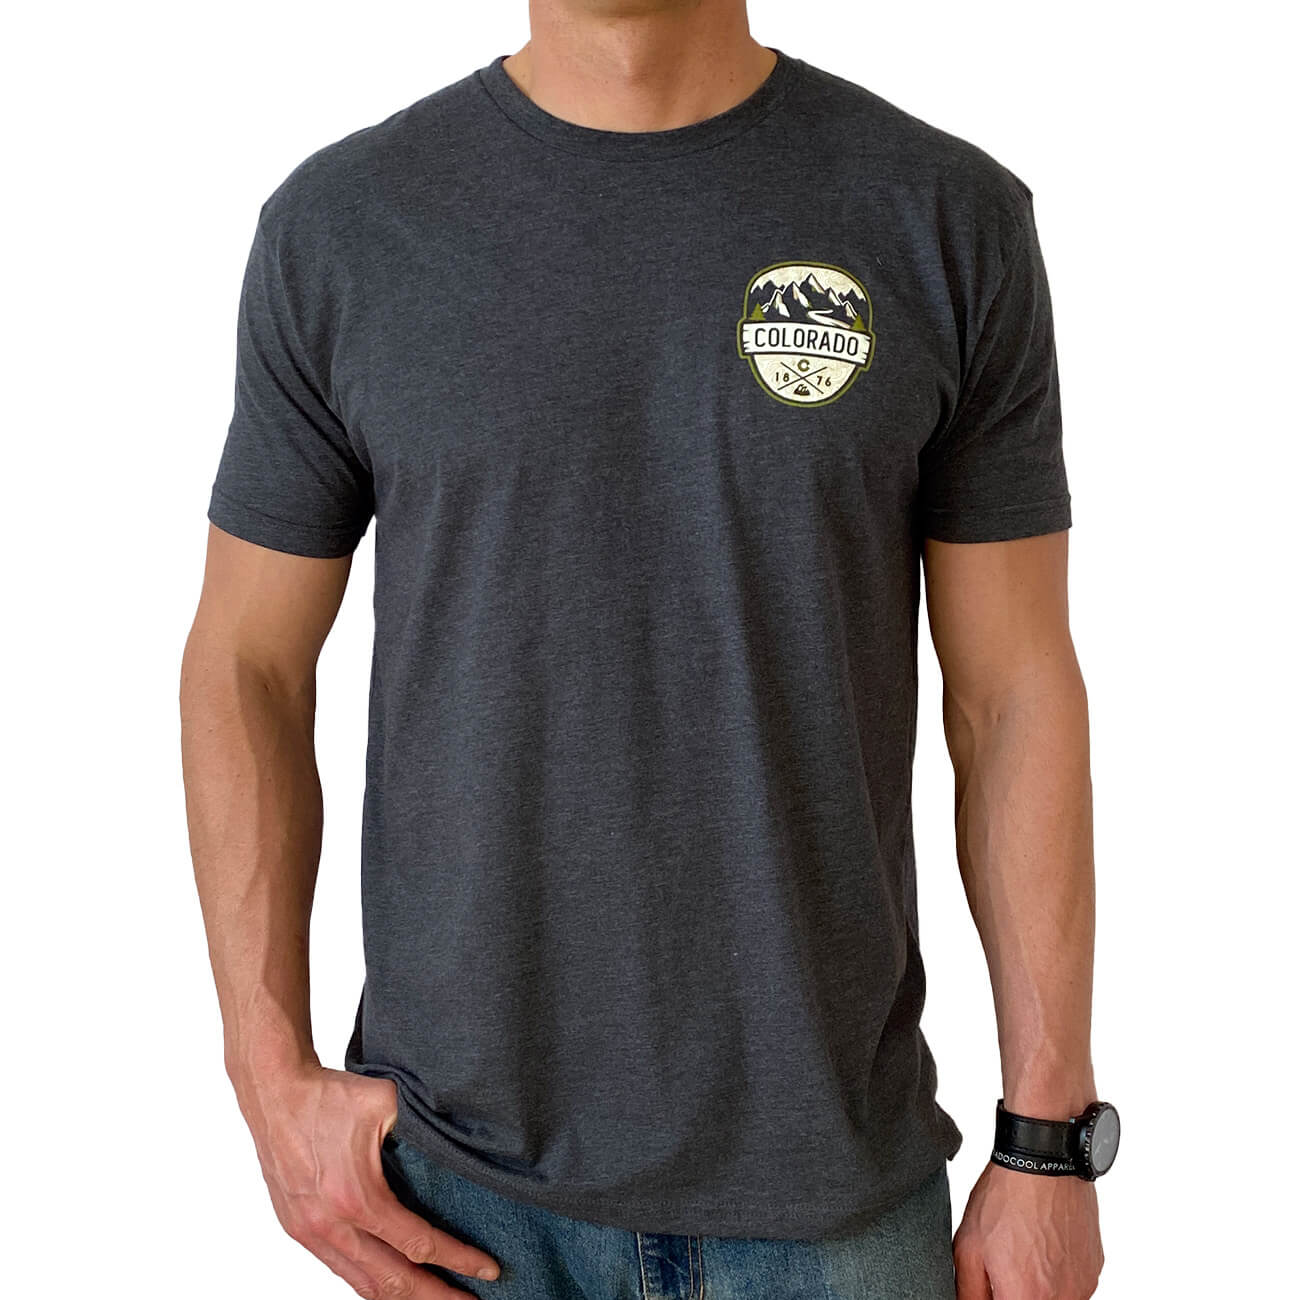 Colorado T-shirt with Mountains